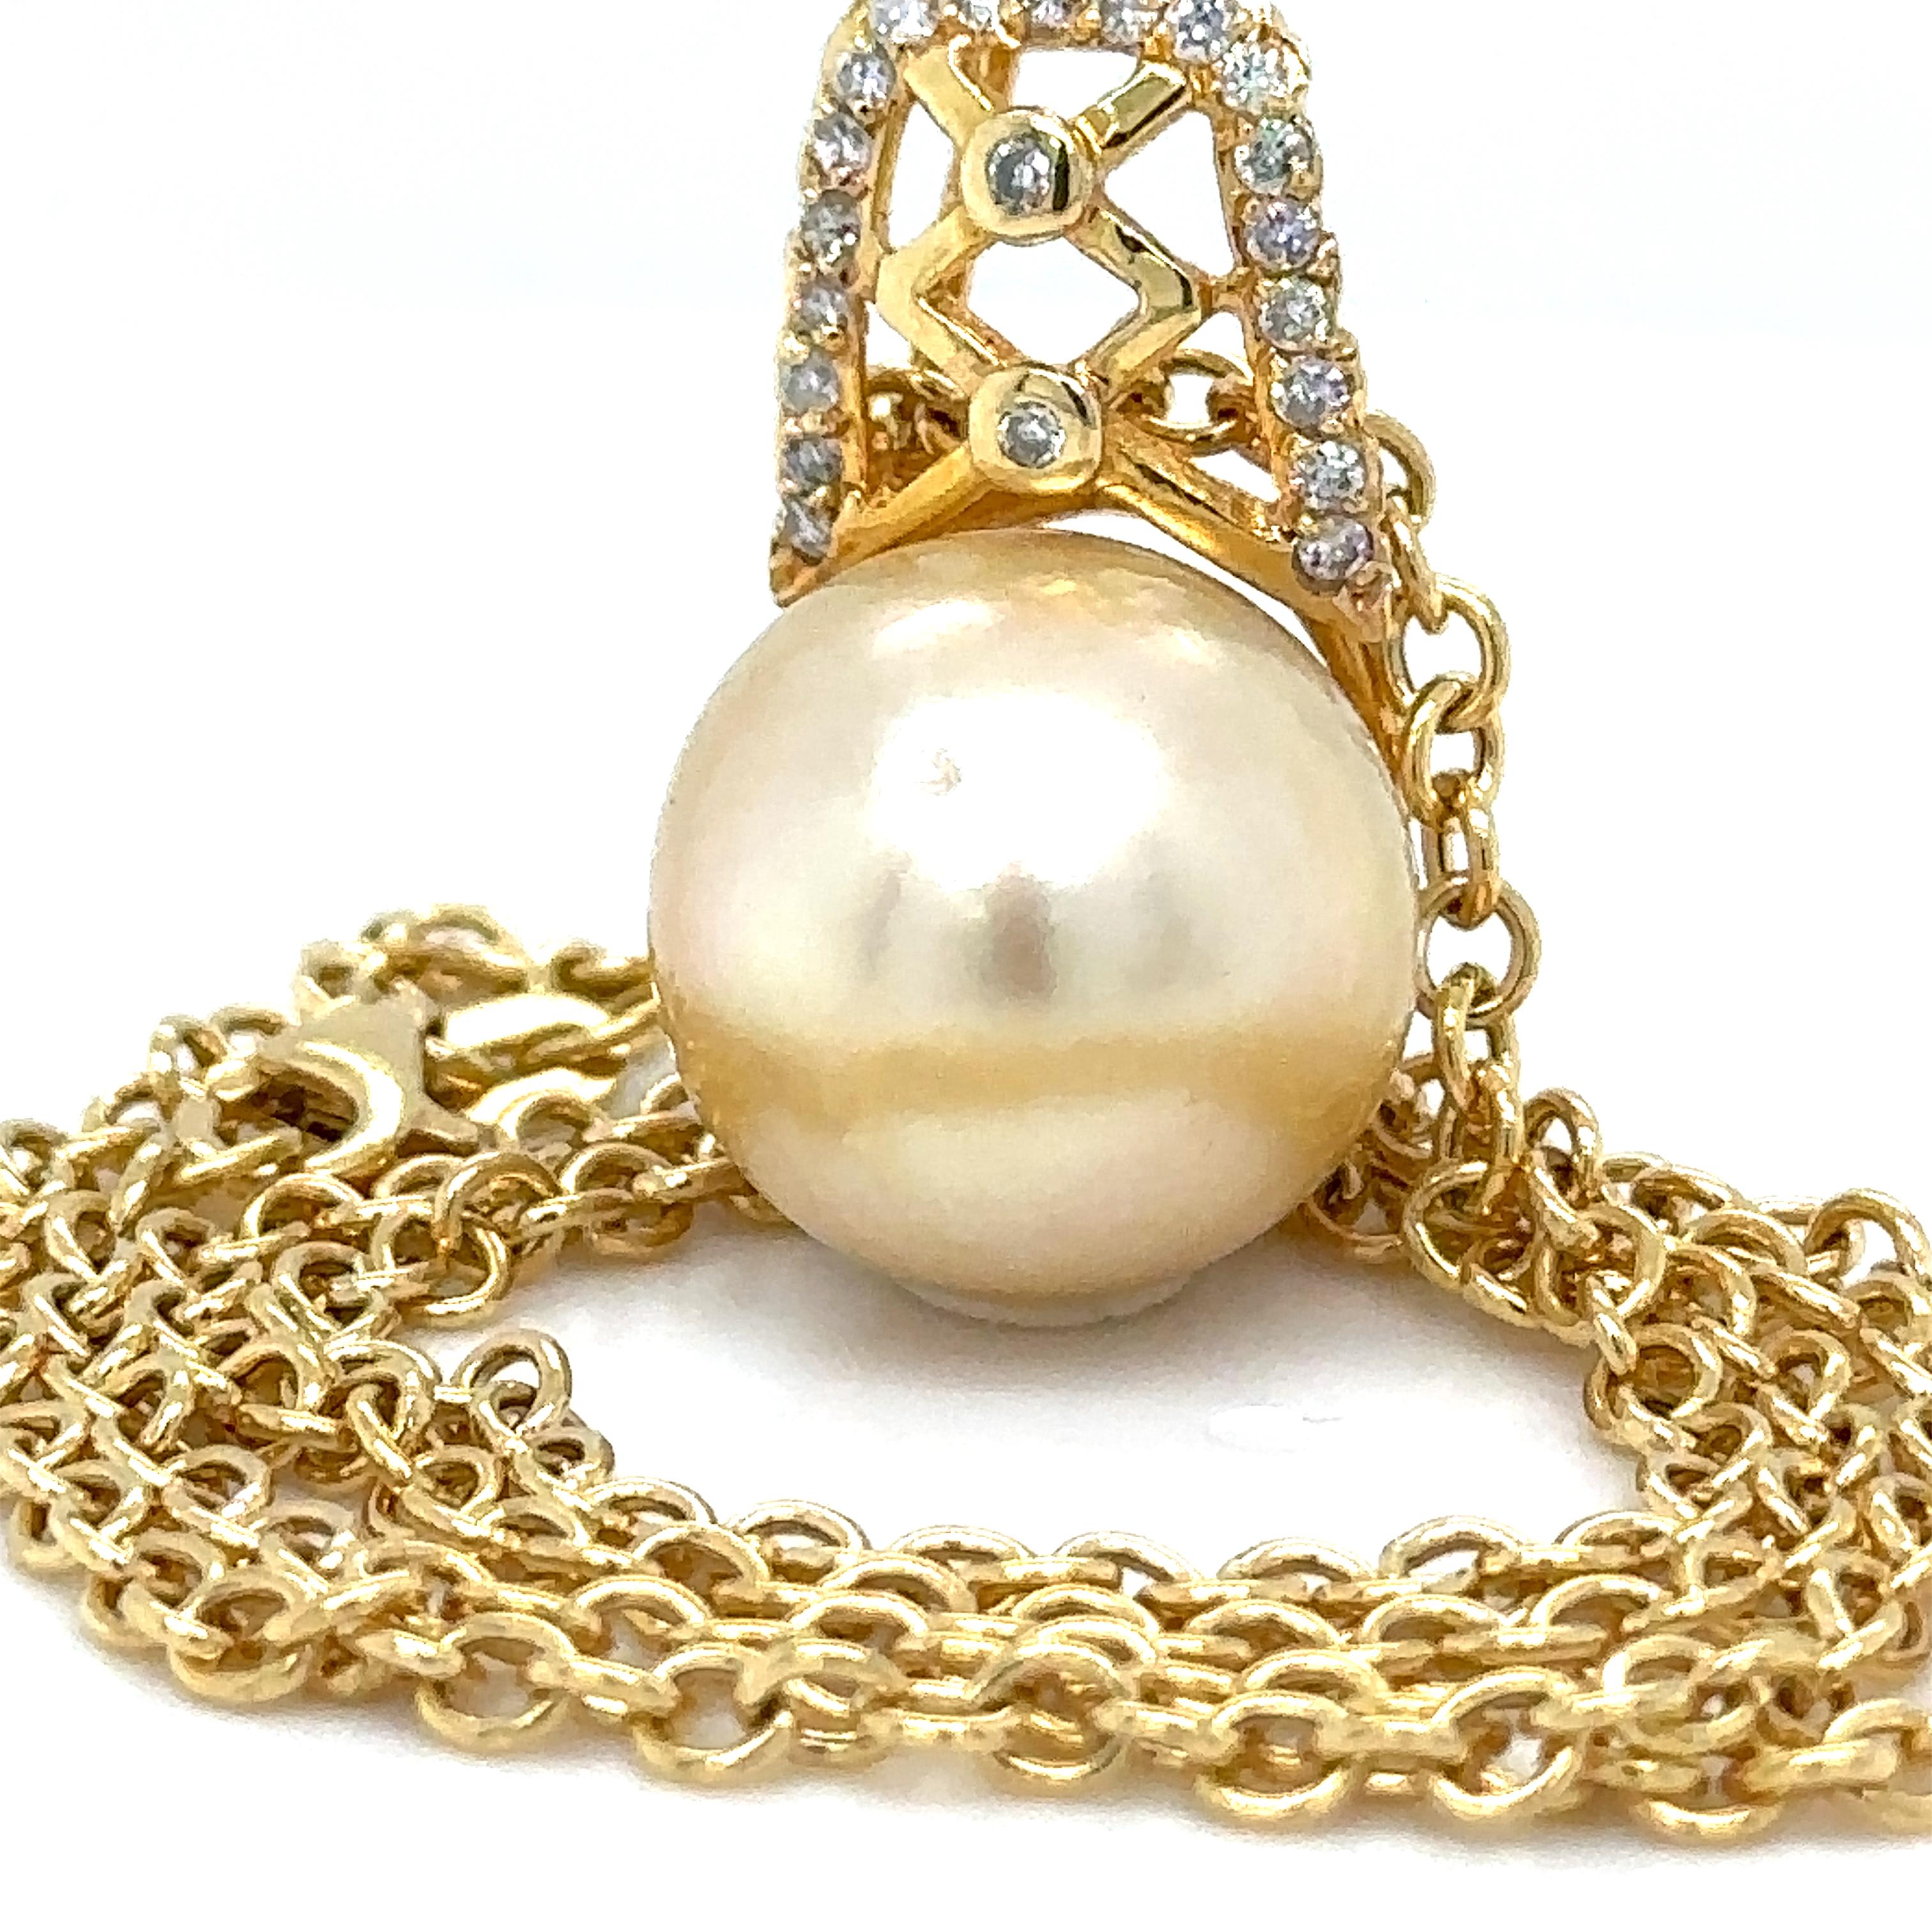 A Pearl And Diamond Pendant And Chain. South Sea cultured pearl is set in 18ct Yellow Gold with 21 round brilliant cut diamonds.

Suspended on an 18ct Yellow gold 46cm oval link neck chain.

Pearl size: 14.6mm, Shape: Semi-round, Colour: Champagne,